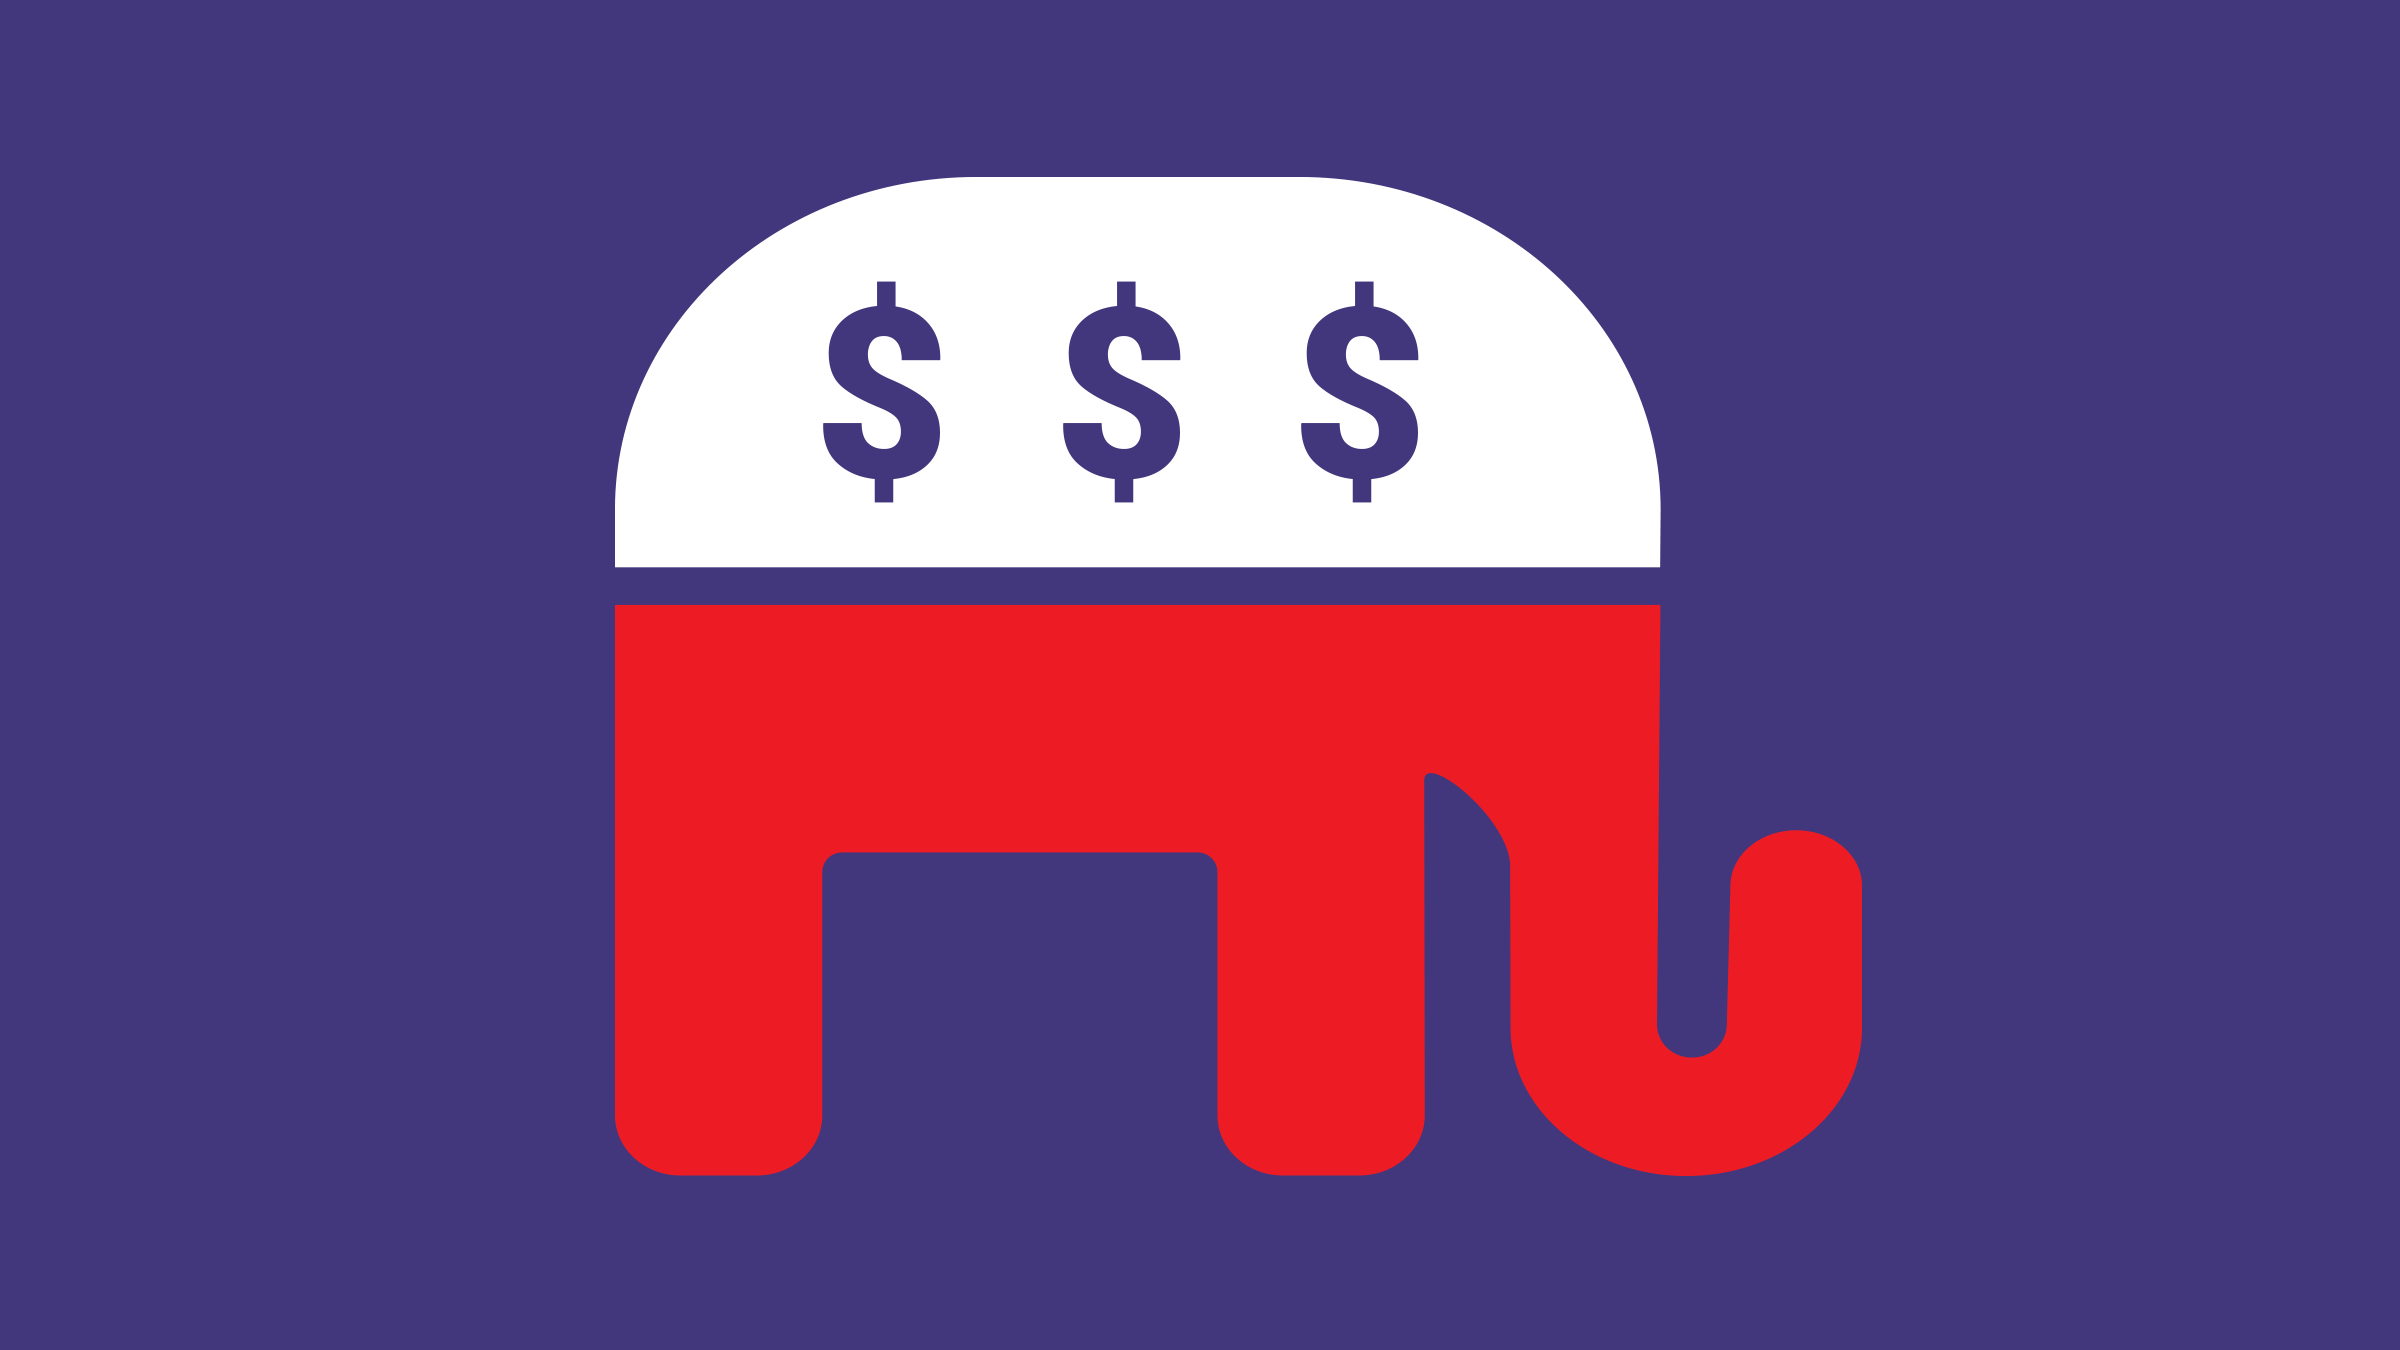 Debate: Is the Republican Party’s Refusal to Raise Taxes Fiscally Irresponsible?